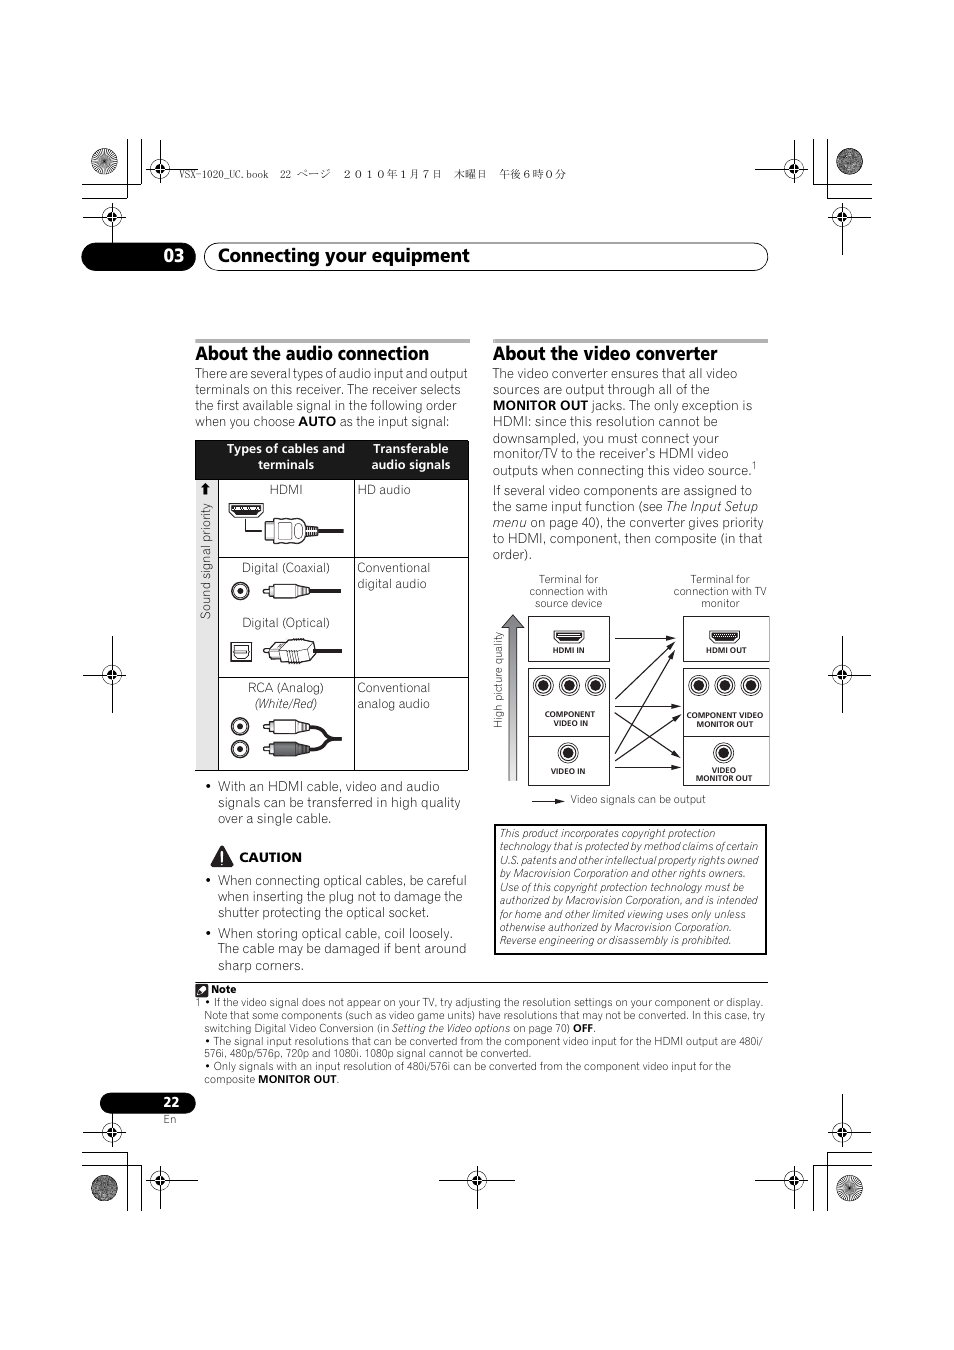 About the audio connection, Sound signal priority l, Hdmi | Hd audio, Digital (coaxial), Conventional digital audio, Digital (optical), Rca (analog), White/red), Conventional analog audio | Pioneer VSX-1020 User Manual | Page 22 / 260